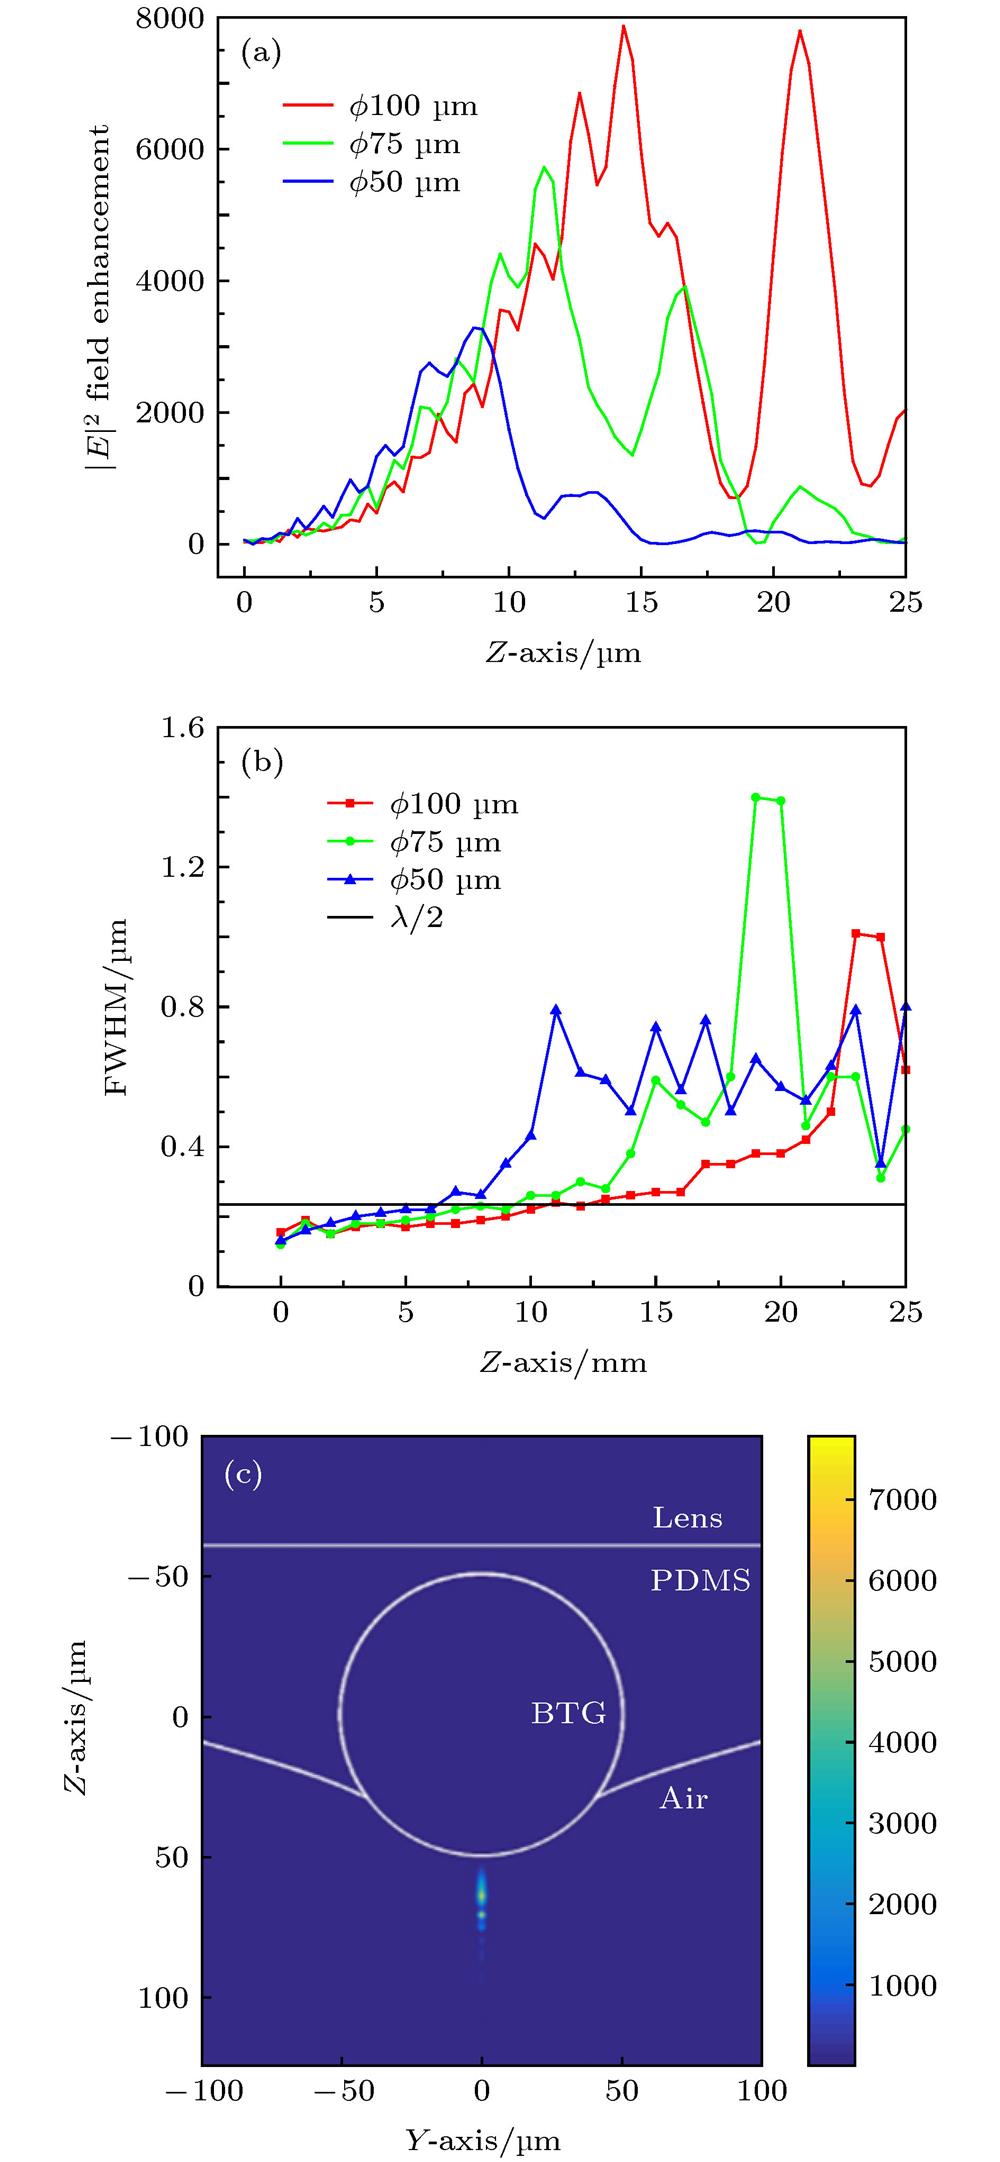 (a) Intensity curve value in Z-axis direction of the photonic nanojet formed by BTG microspheres with diameters of 50, 75 and 100 μm; (b) FWHM of the photonic nanojet formed by BTG microspheres; (c) The photonic nanojet formed by 100 μm microspheres at the wavelength of 470 nm.